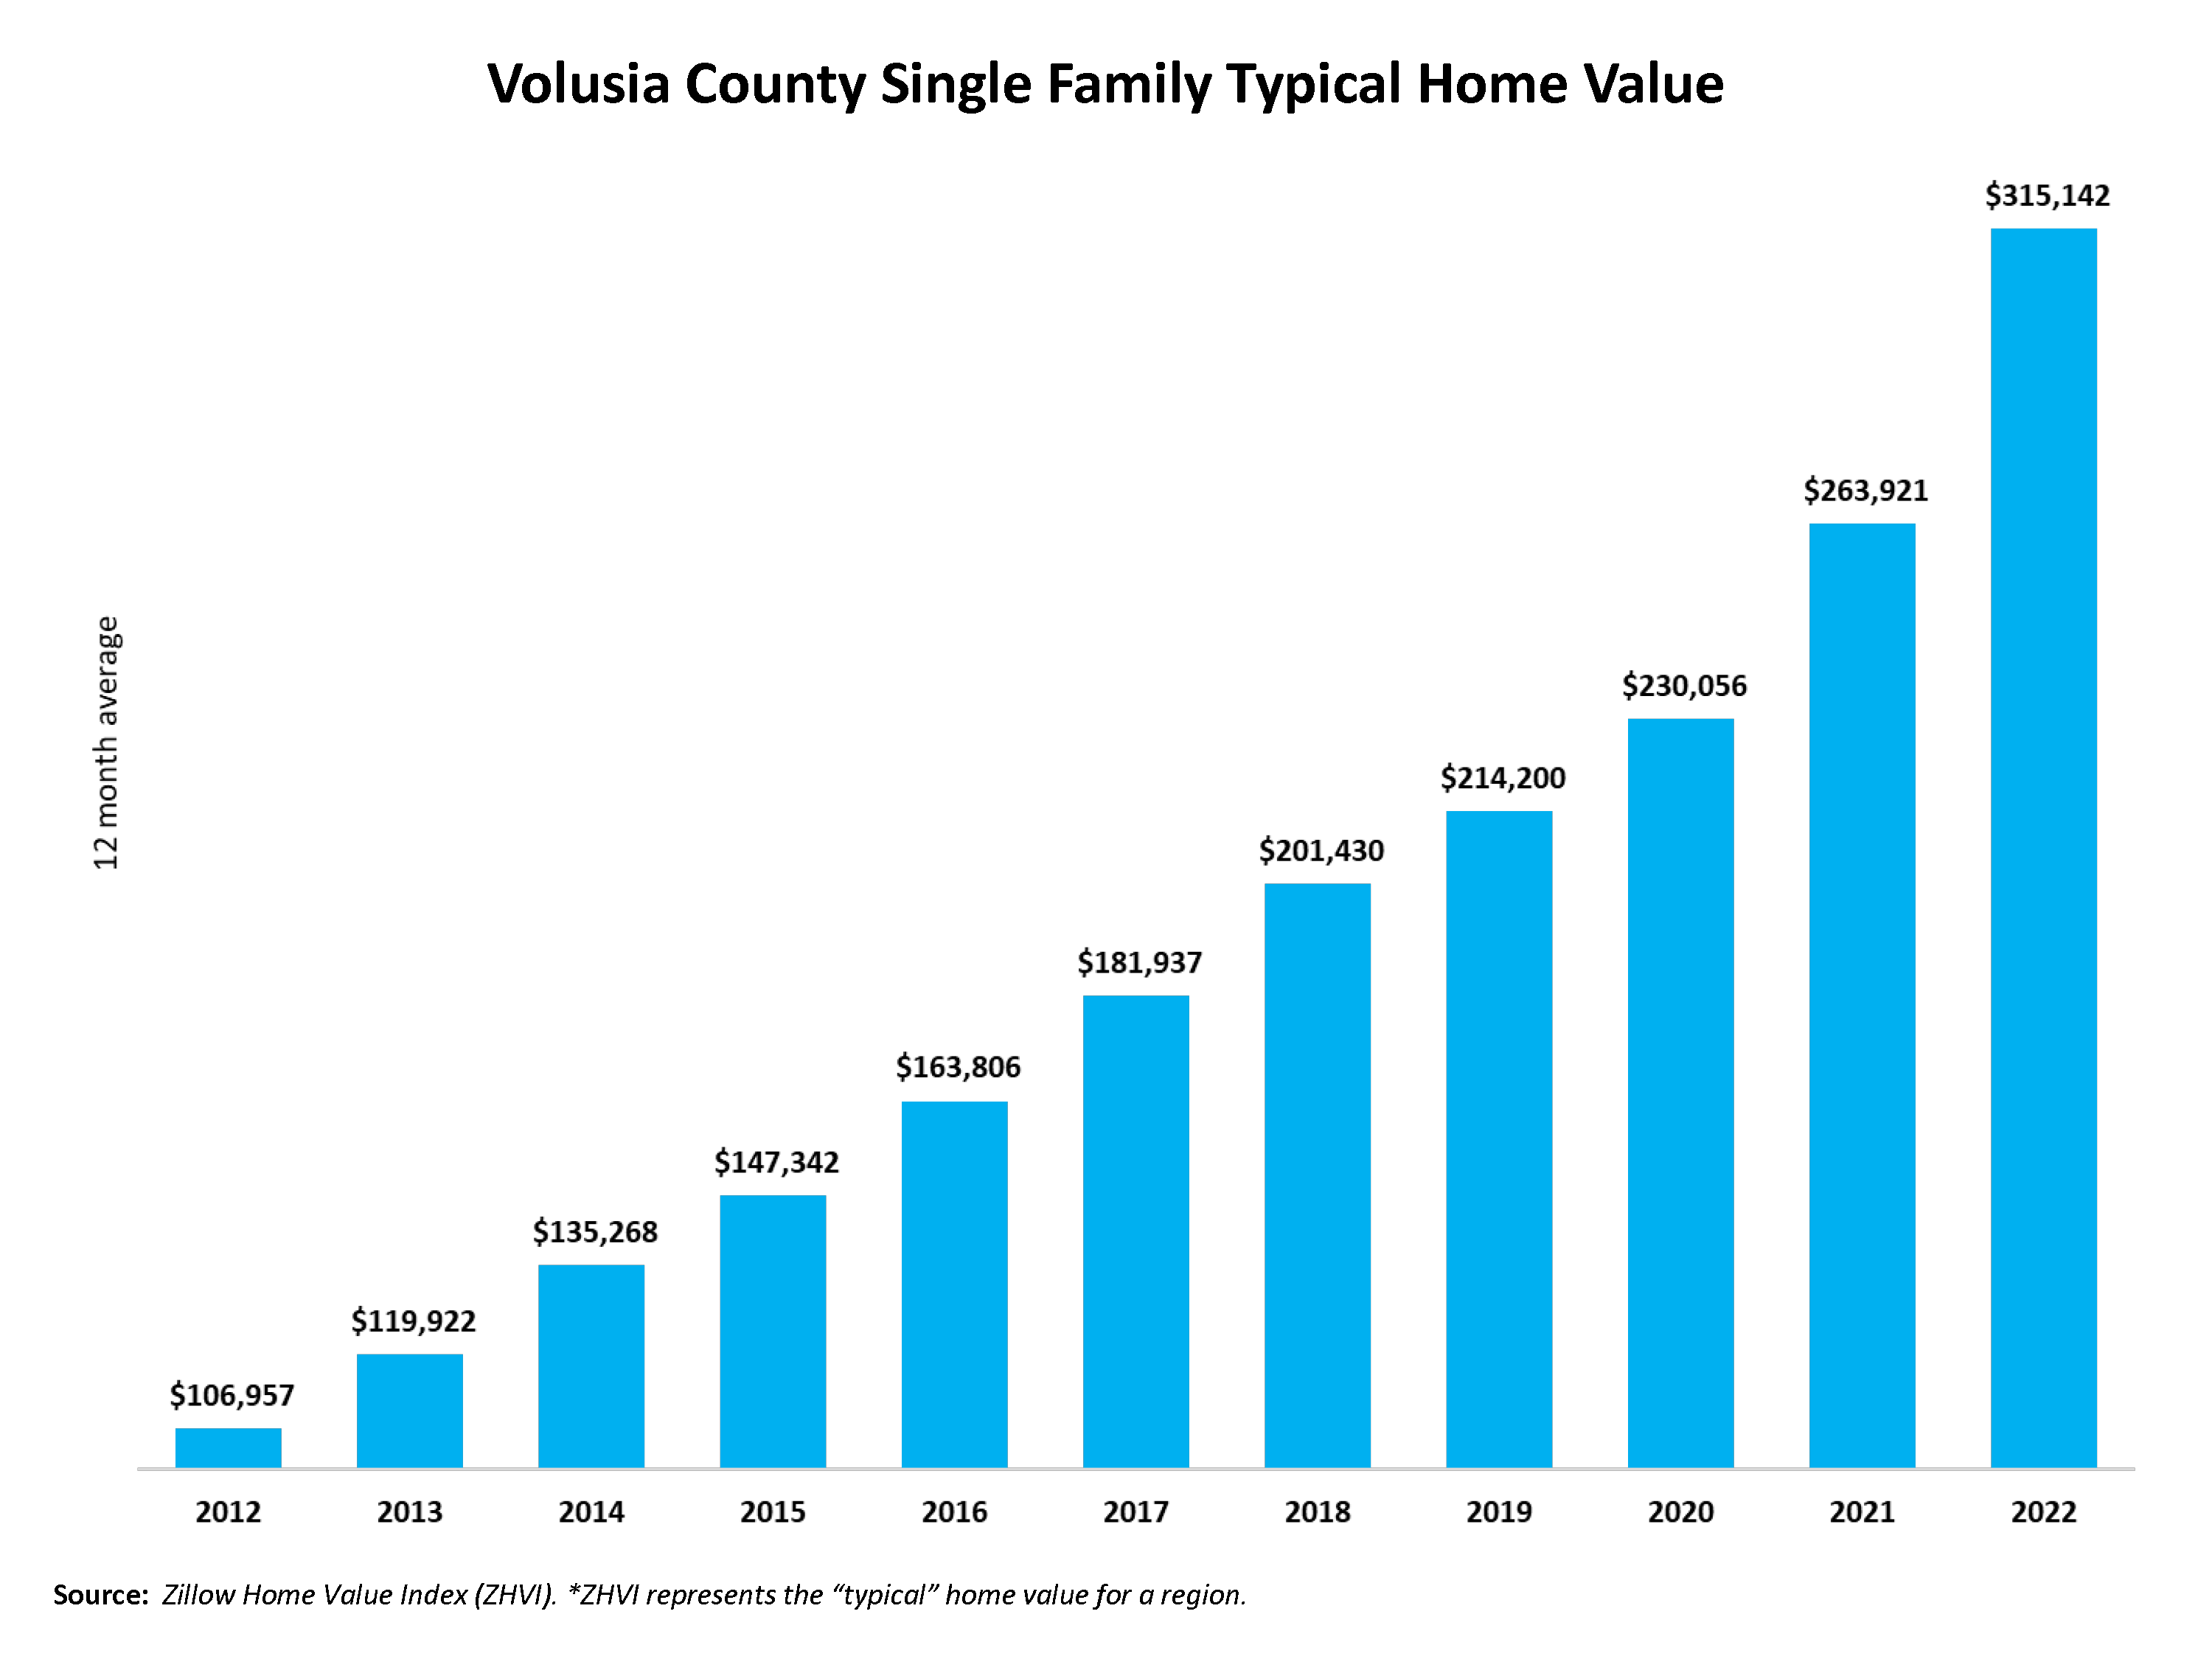 The chart is showing the steady increase of single family typical home values from 2012 where it was $106,957 and as of the end of 2022, the average home value was $315,142. From 2020 to 2022, the average single family home value increased 37%.